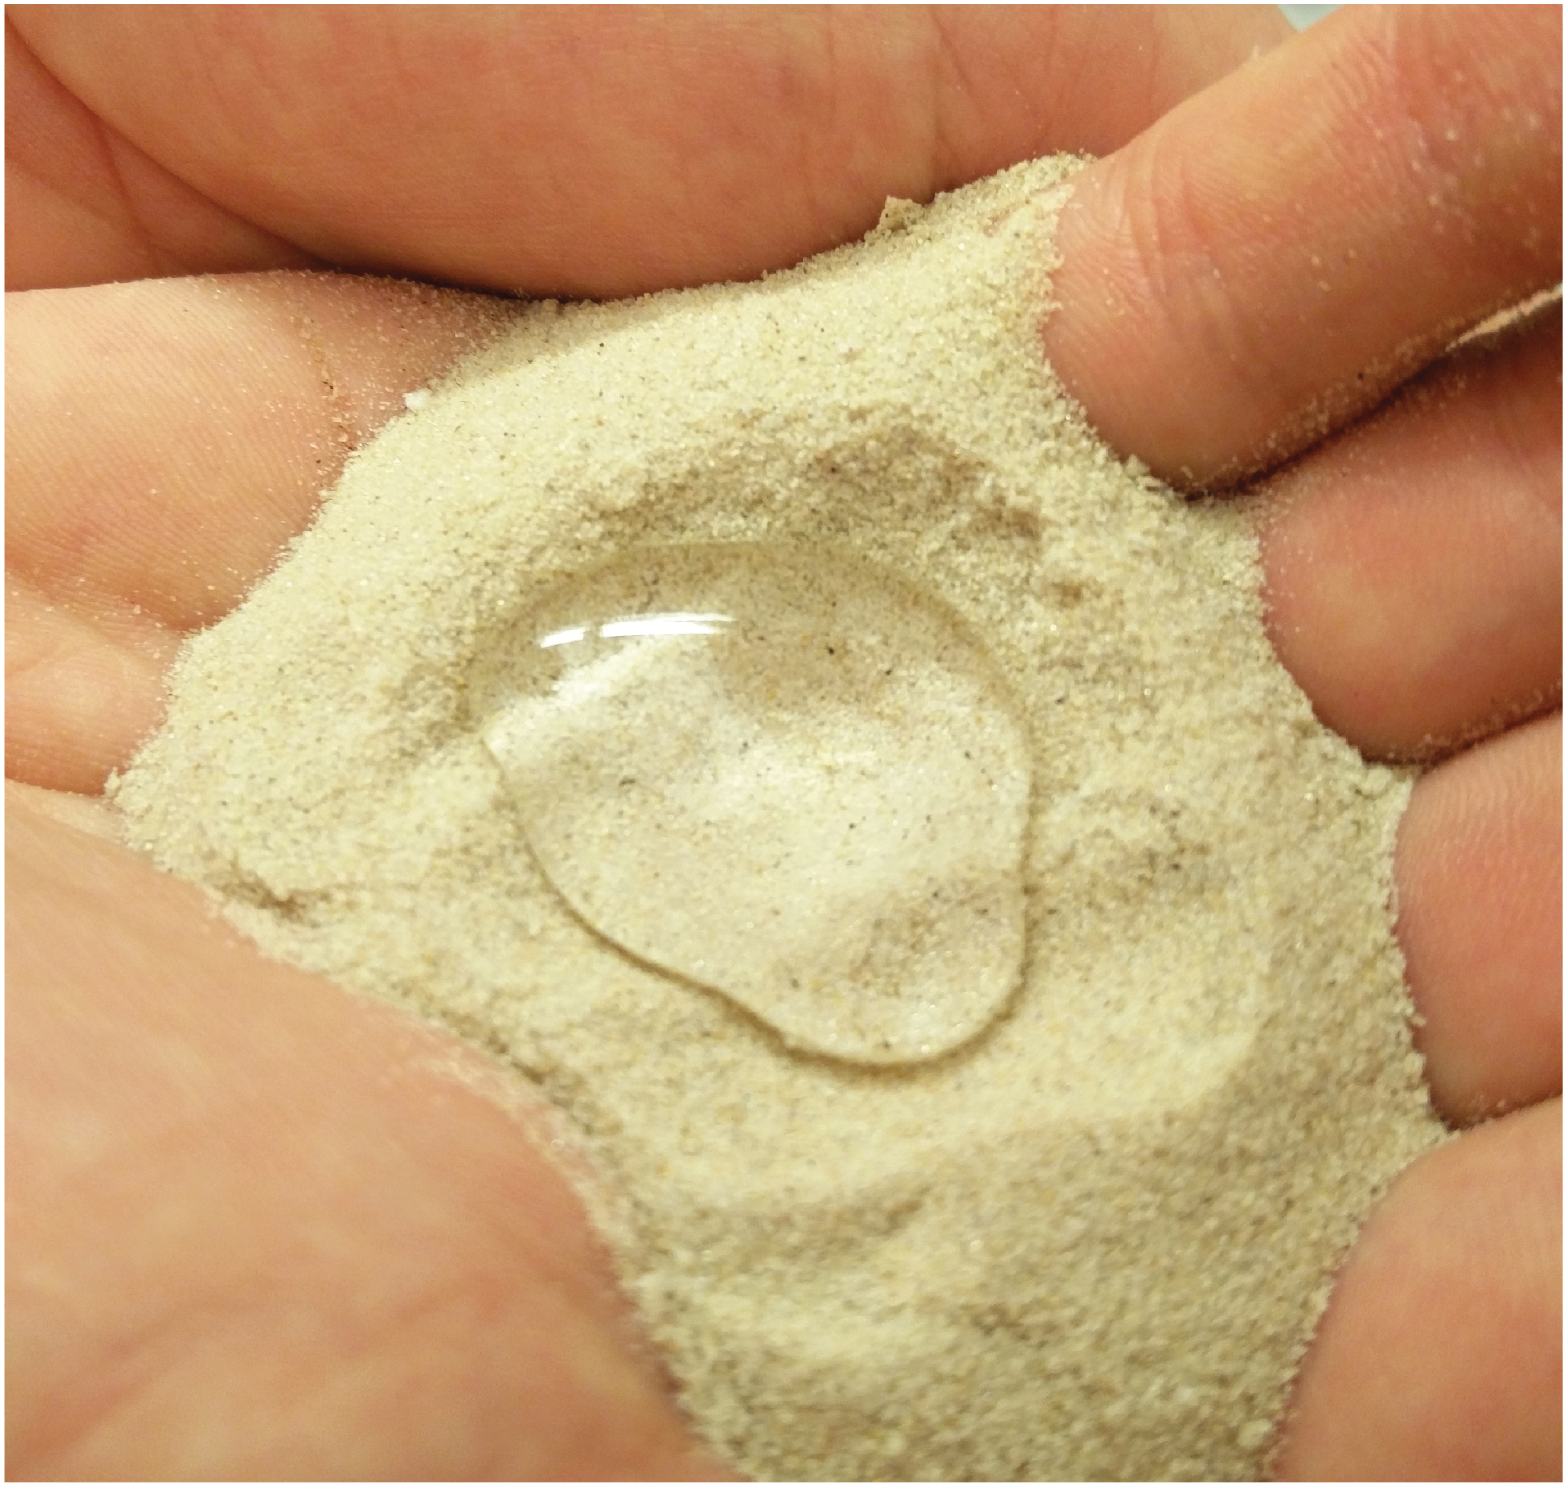 Paraffin wax-coated sand is an extremely water-repellant material, which keeps soil wet and increases crop yields in arid environments. Credit: Adapted from ACS Agricultural Science &Technology 2022, DOI: 10.1021/acsagscitech.1c00148